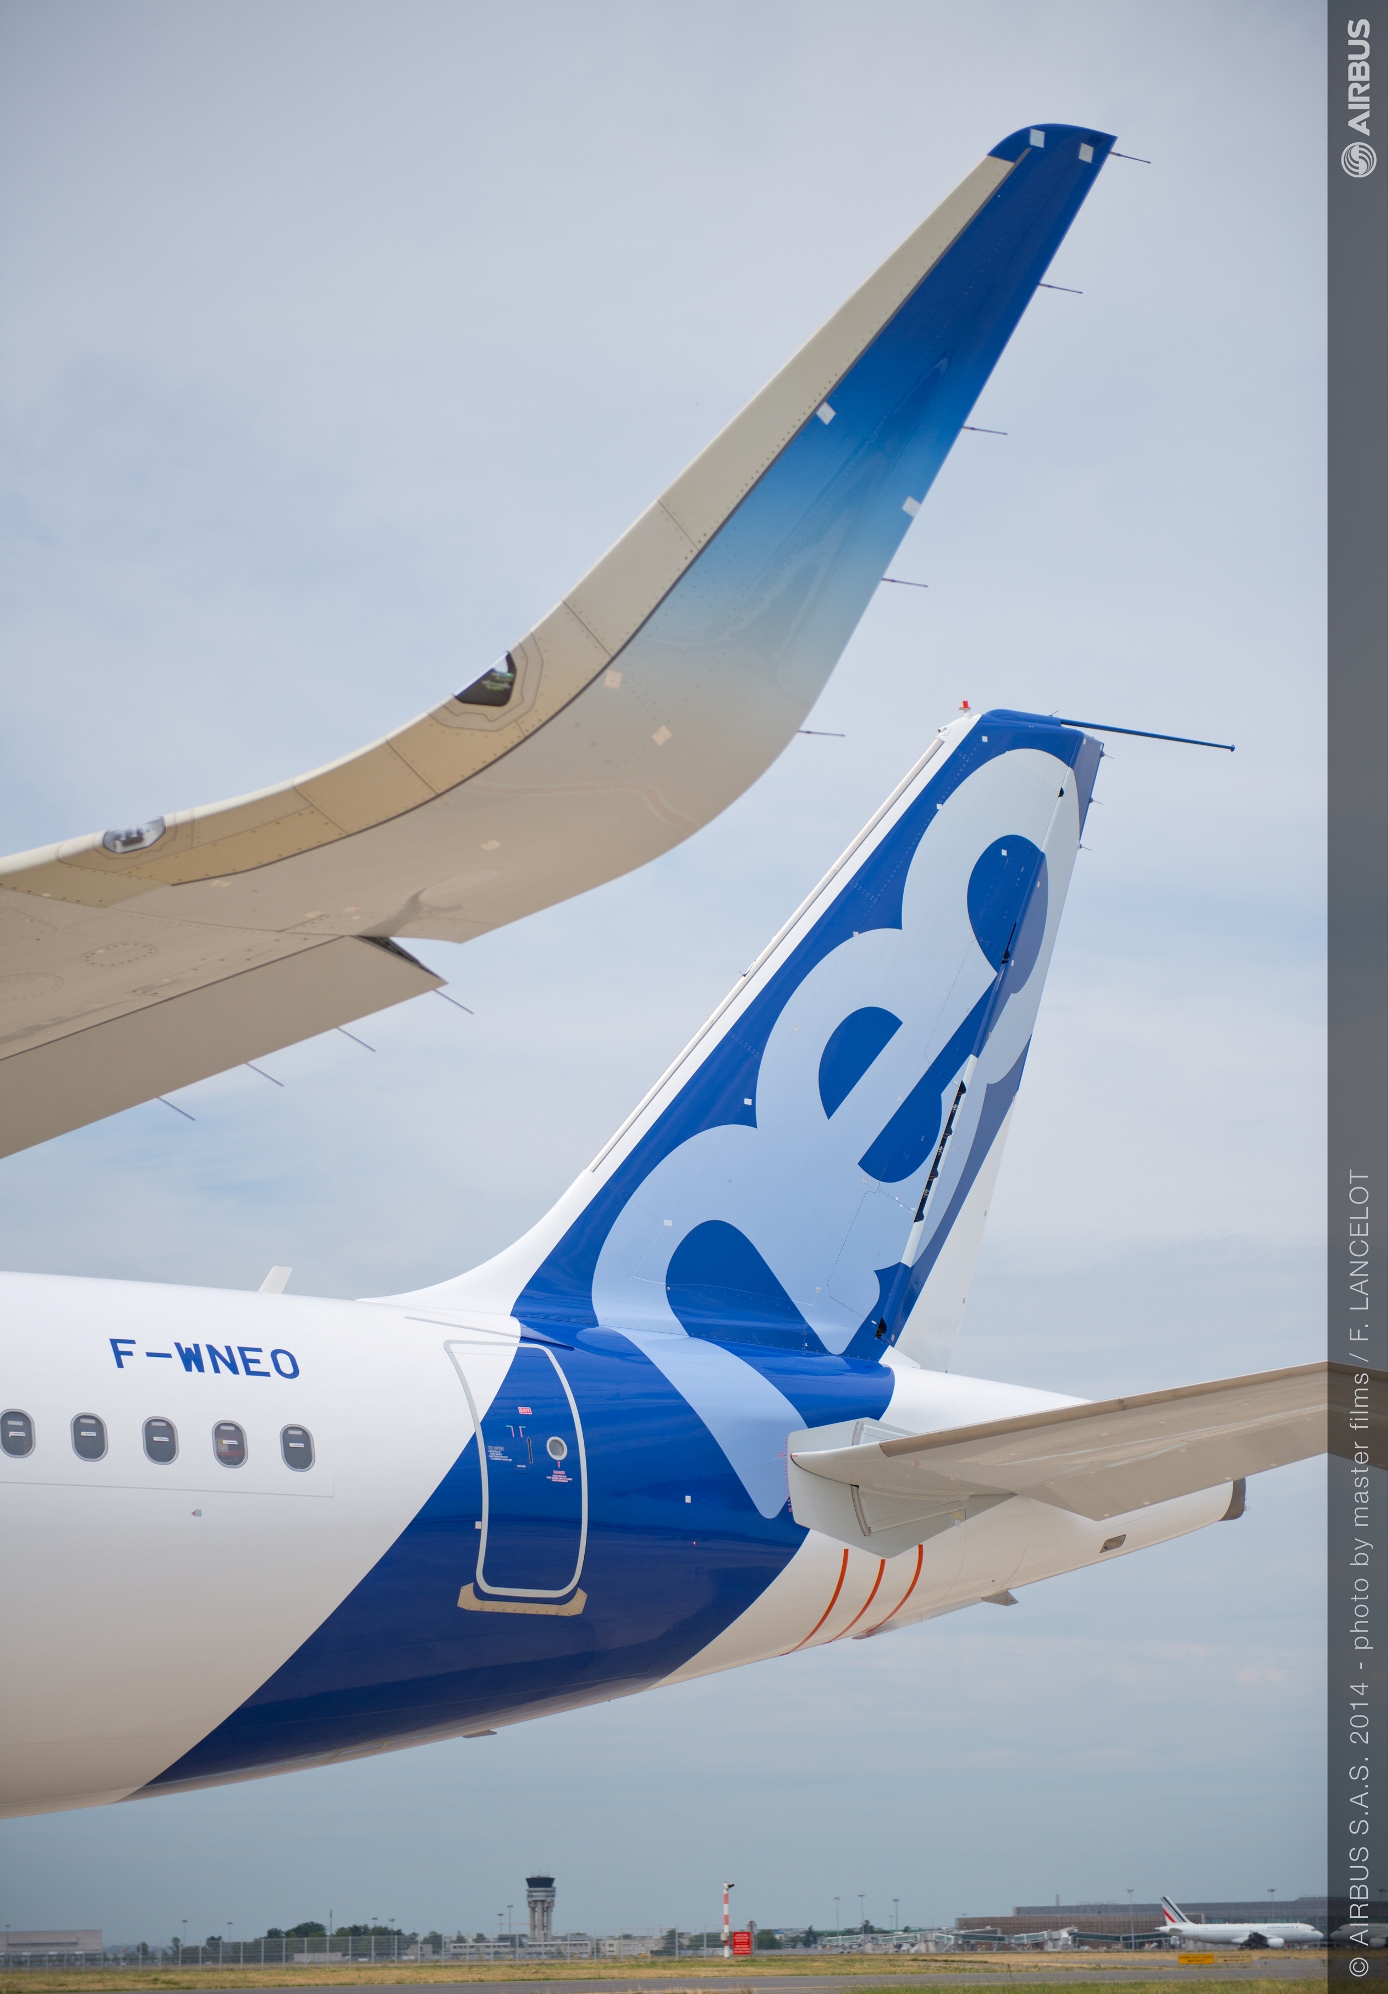 Airbus A320neo with Pratt & Whitney engines is certified